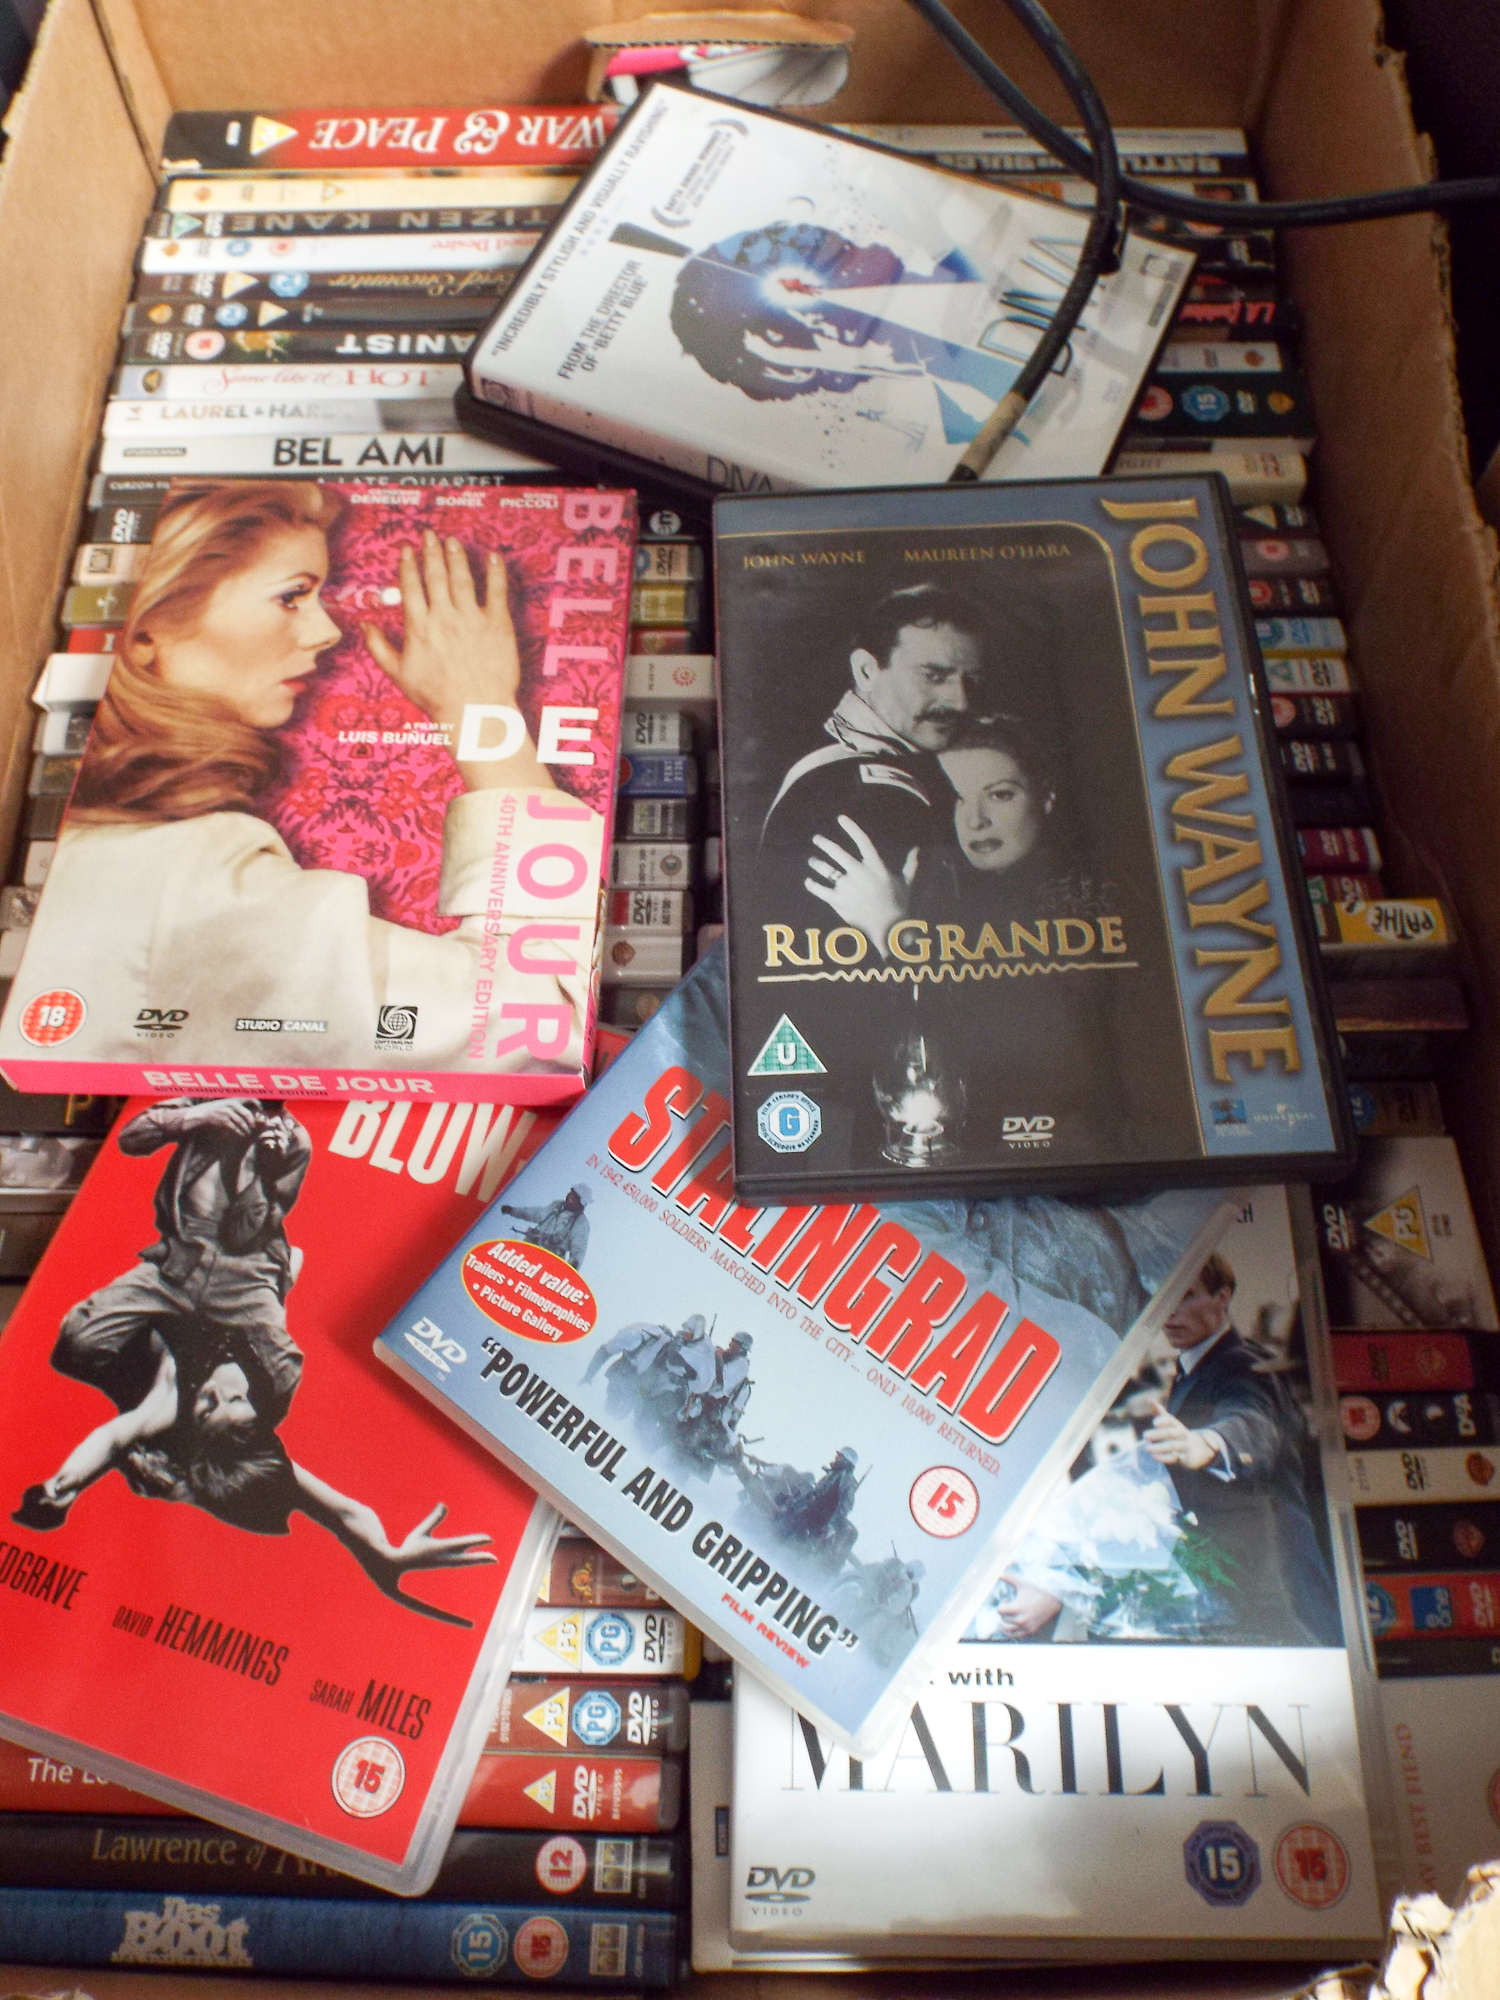 A large box of DVDs